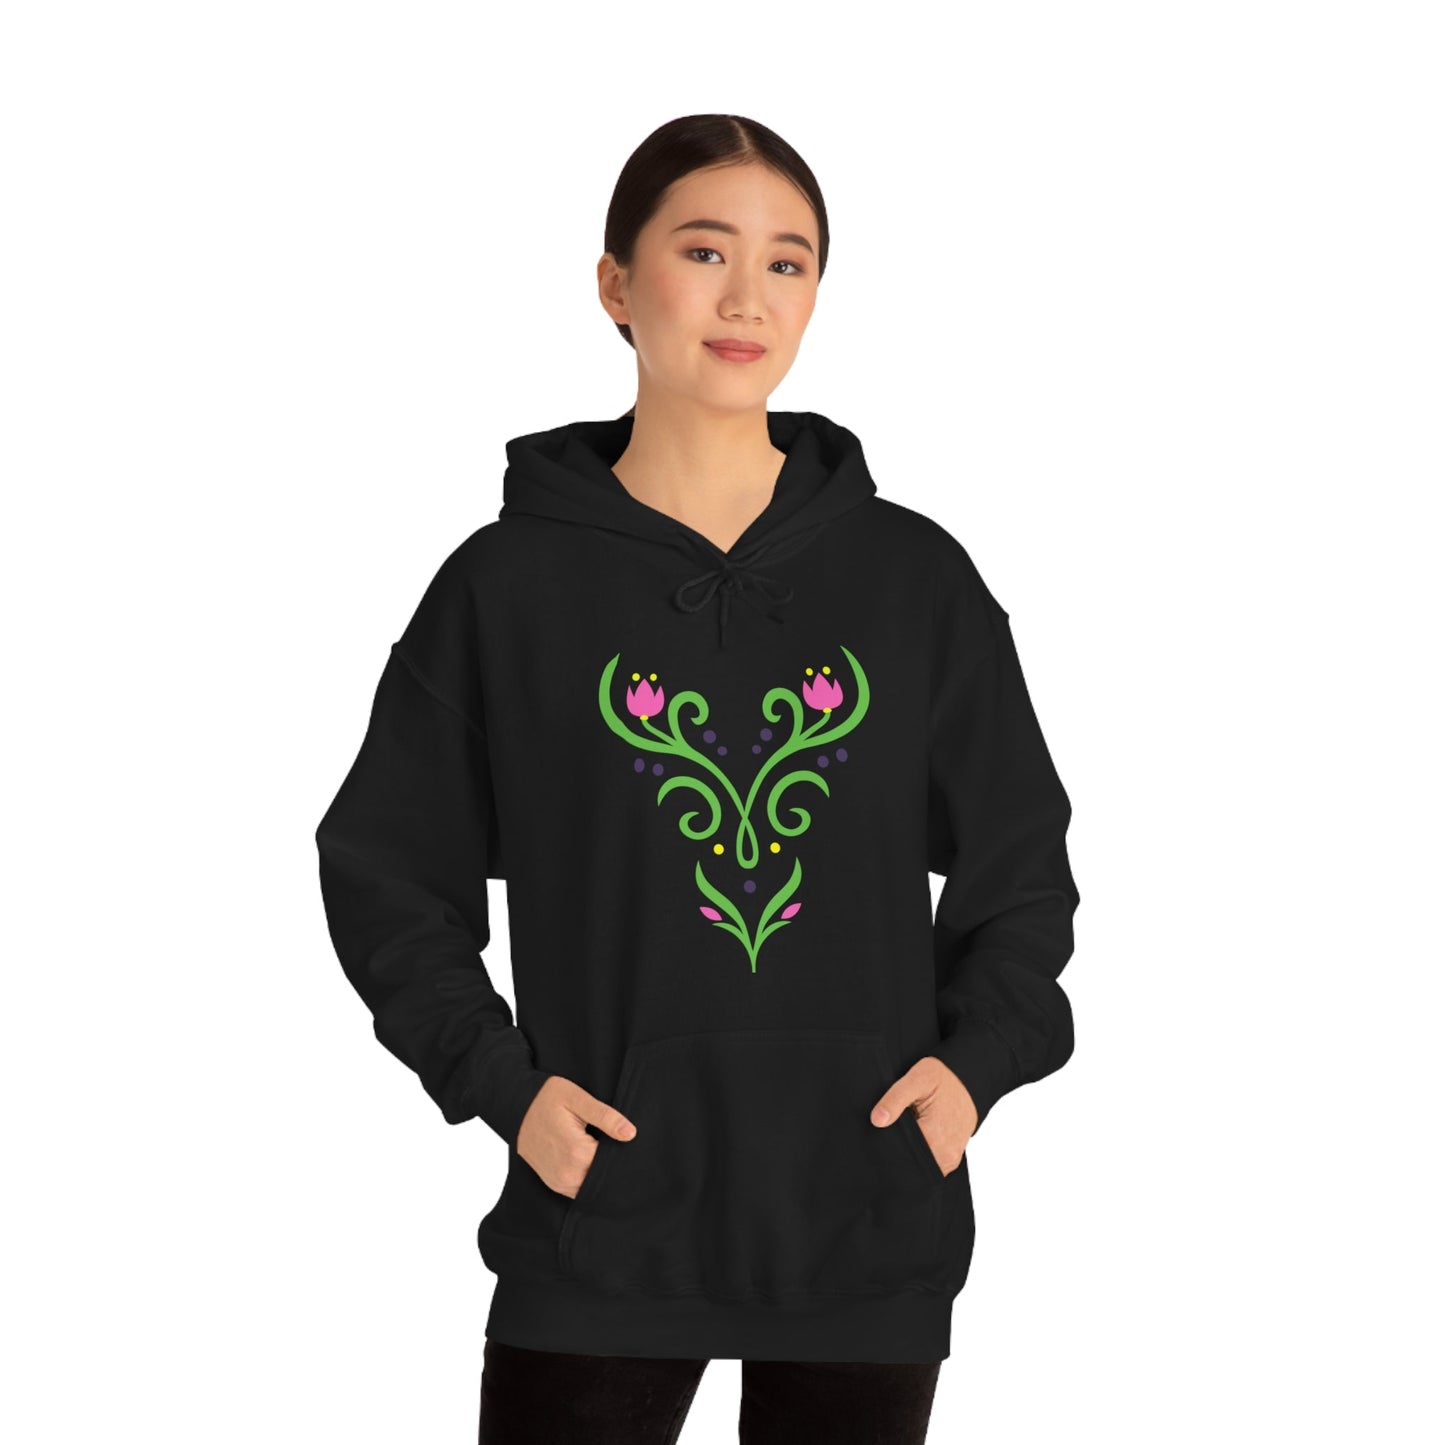 Unisex Heavy Blend Hooded Sweatshirt DTGhappiness is addictiveAdult T-ShirtLittle Lady Shay Boutique